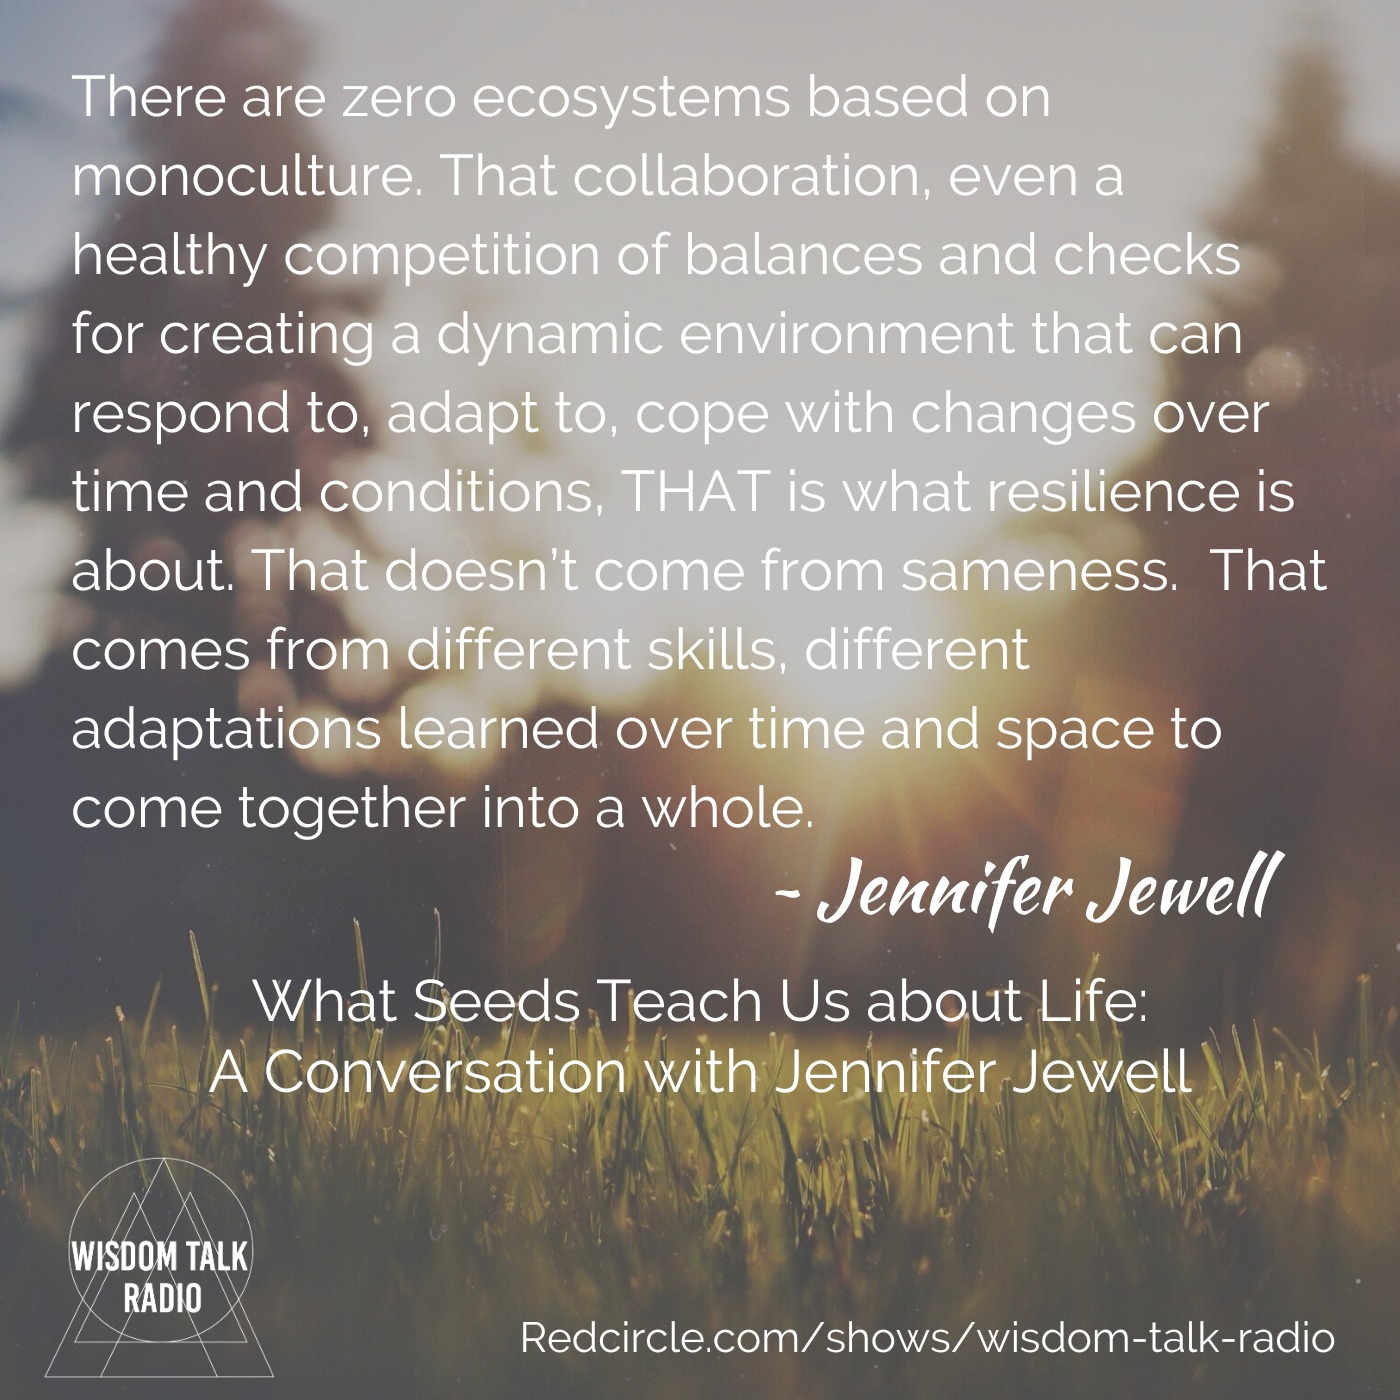 What Seeds Teach Us About Life: a Conversation with Jennifer Jewell